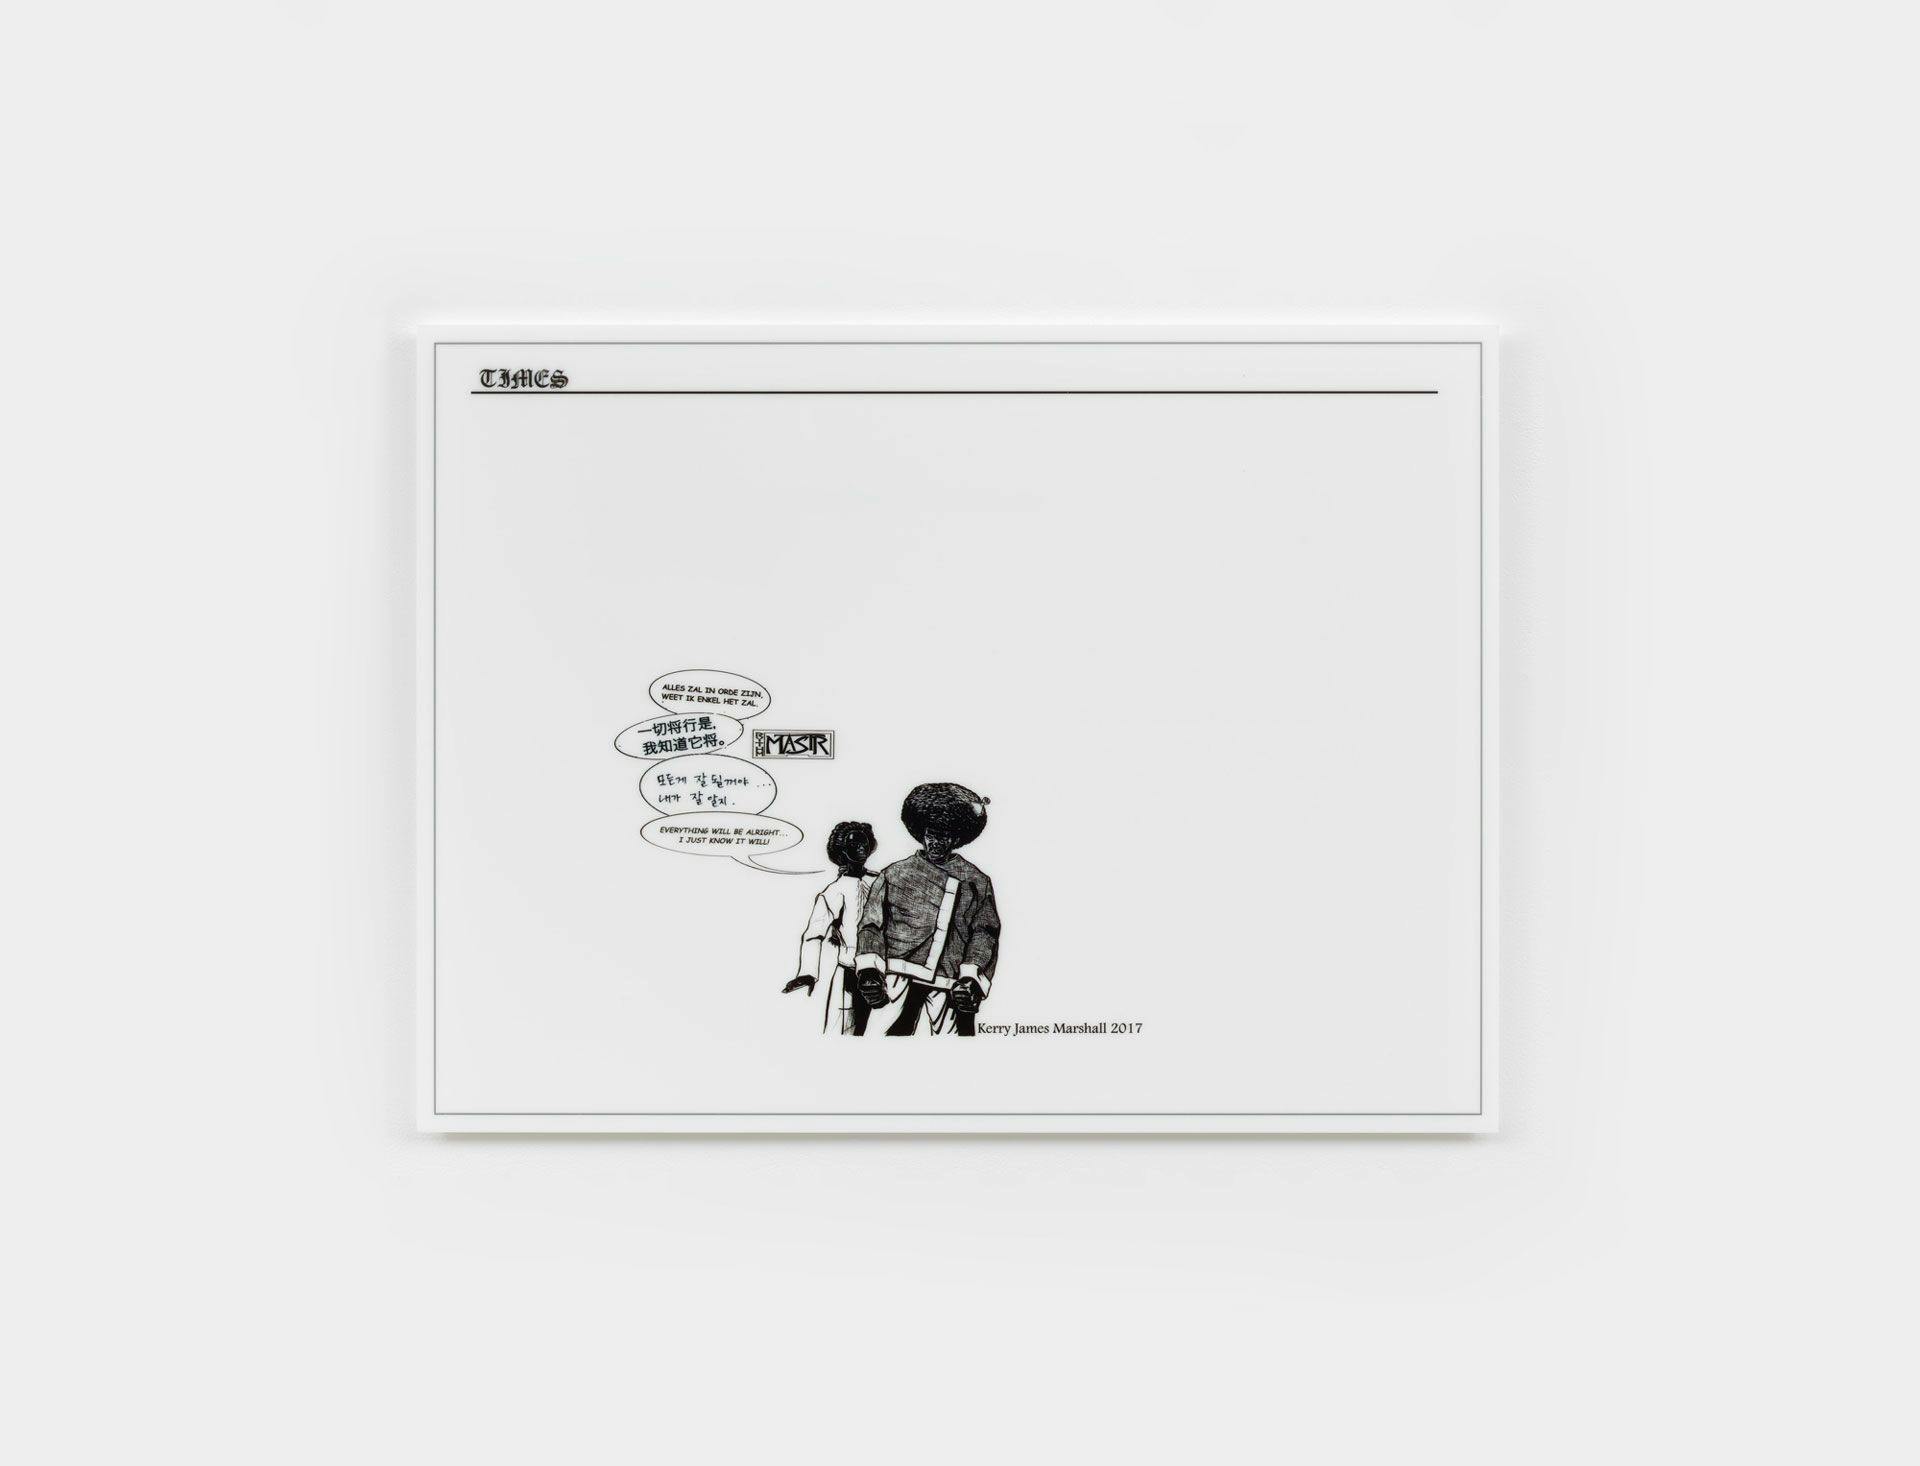 An inkjet print on plexiglas by Kerry James Marshall titled Dailies: Everything will be alright, dated 2017.